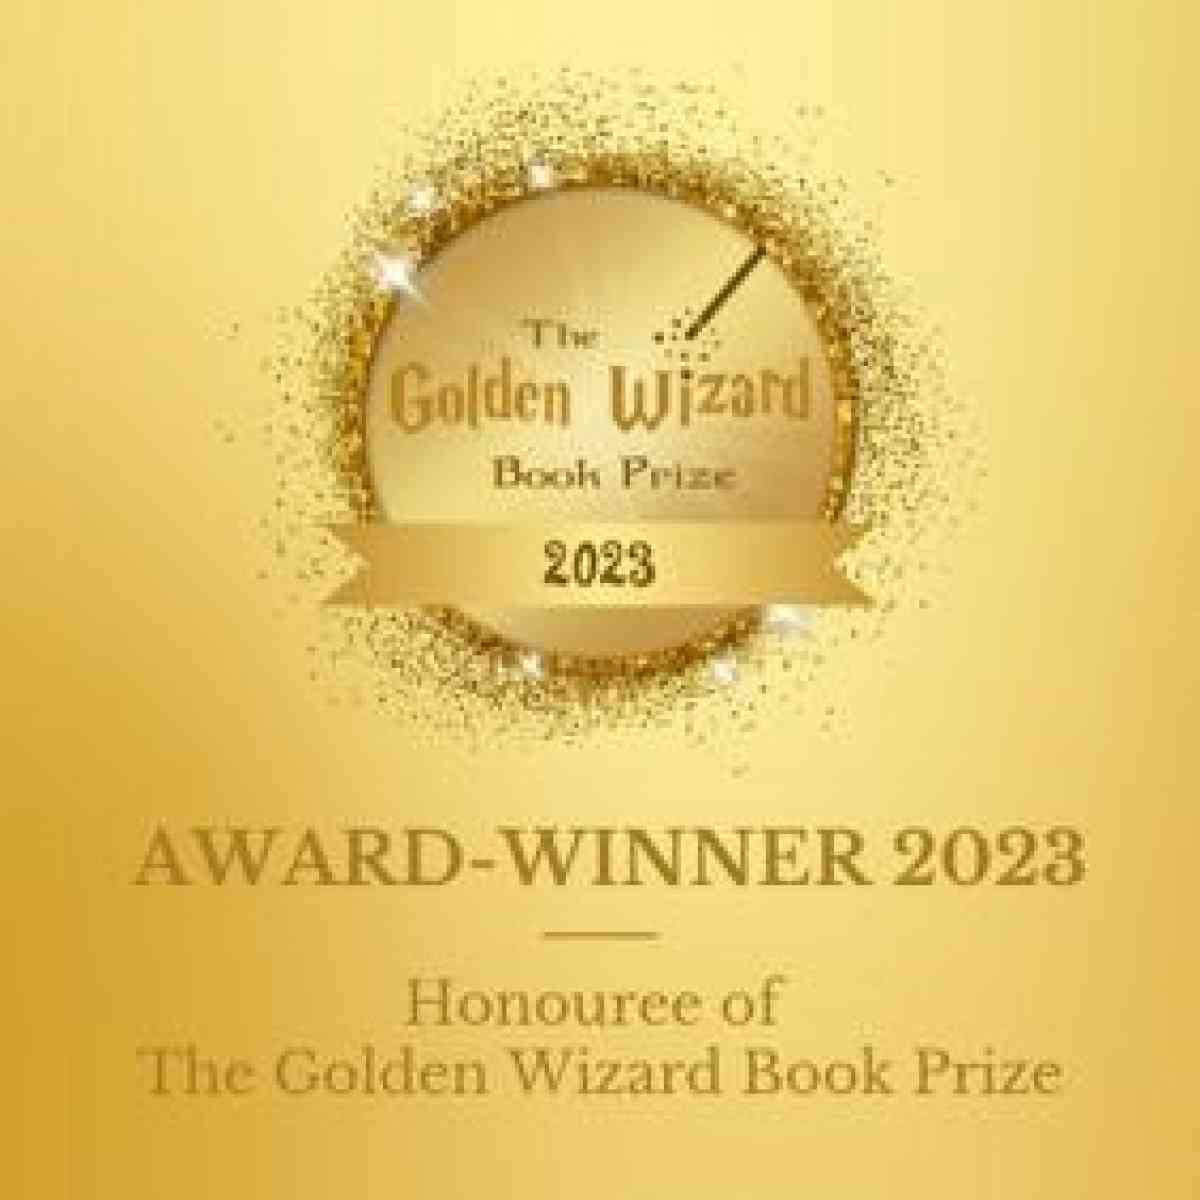 Helen Farrugia honoured with The Golden Wizard Book Prize 2023 for her book